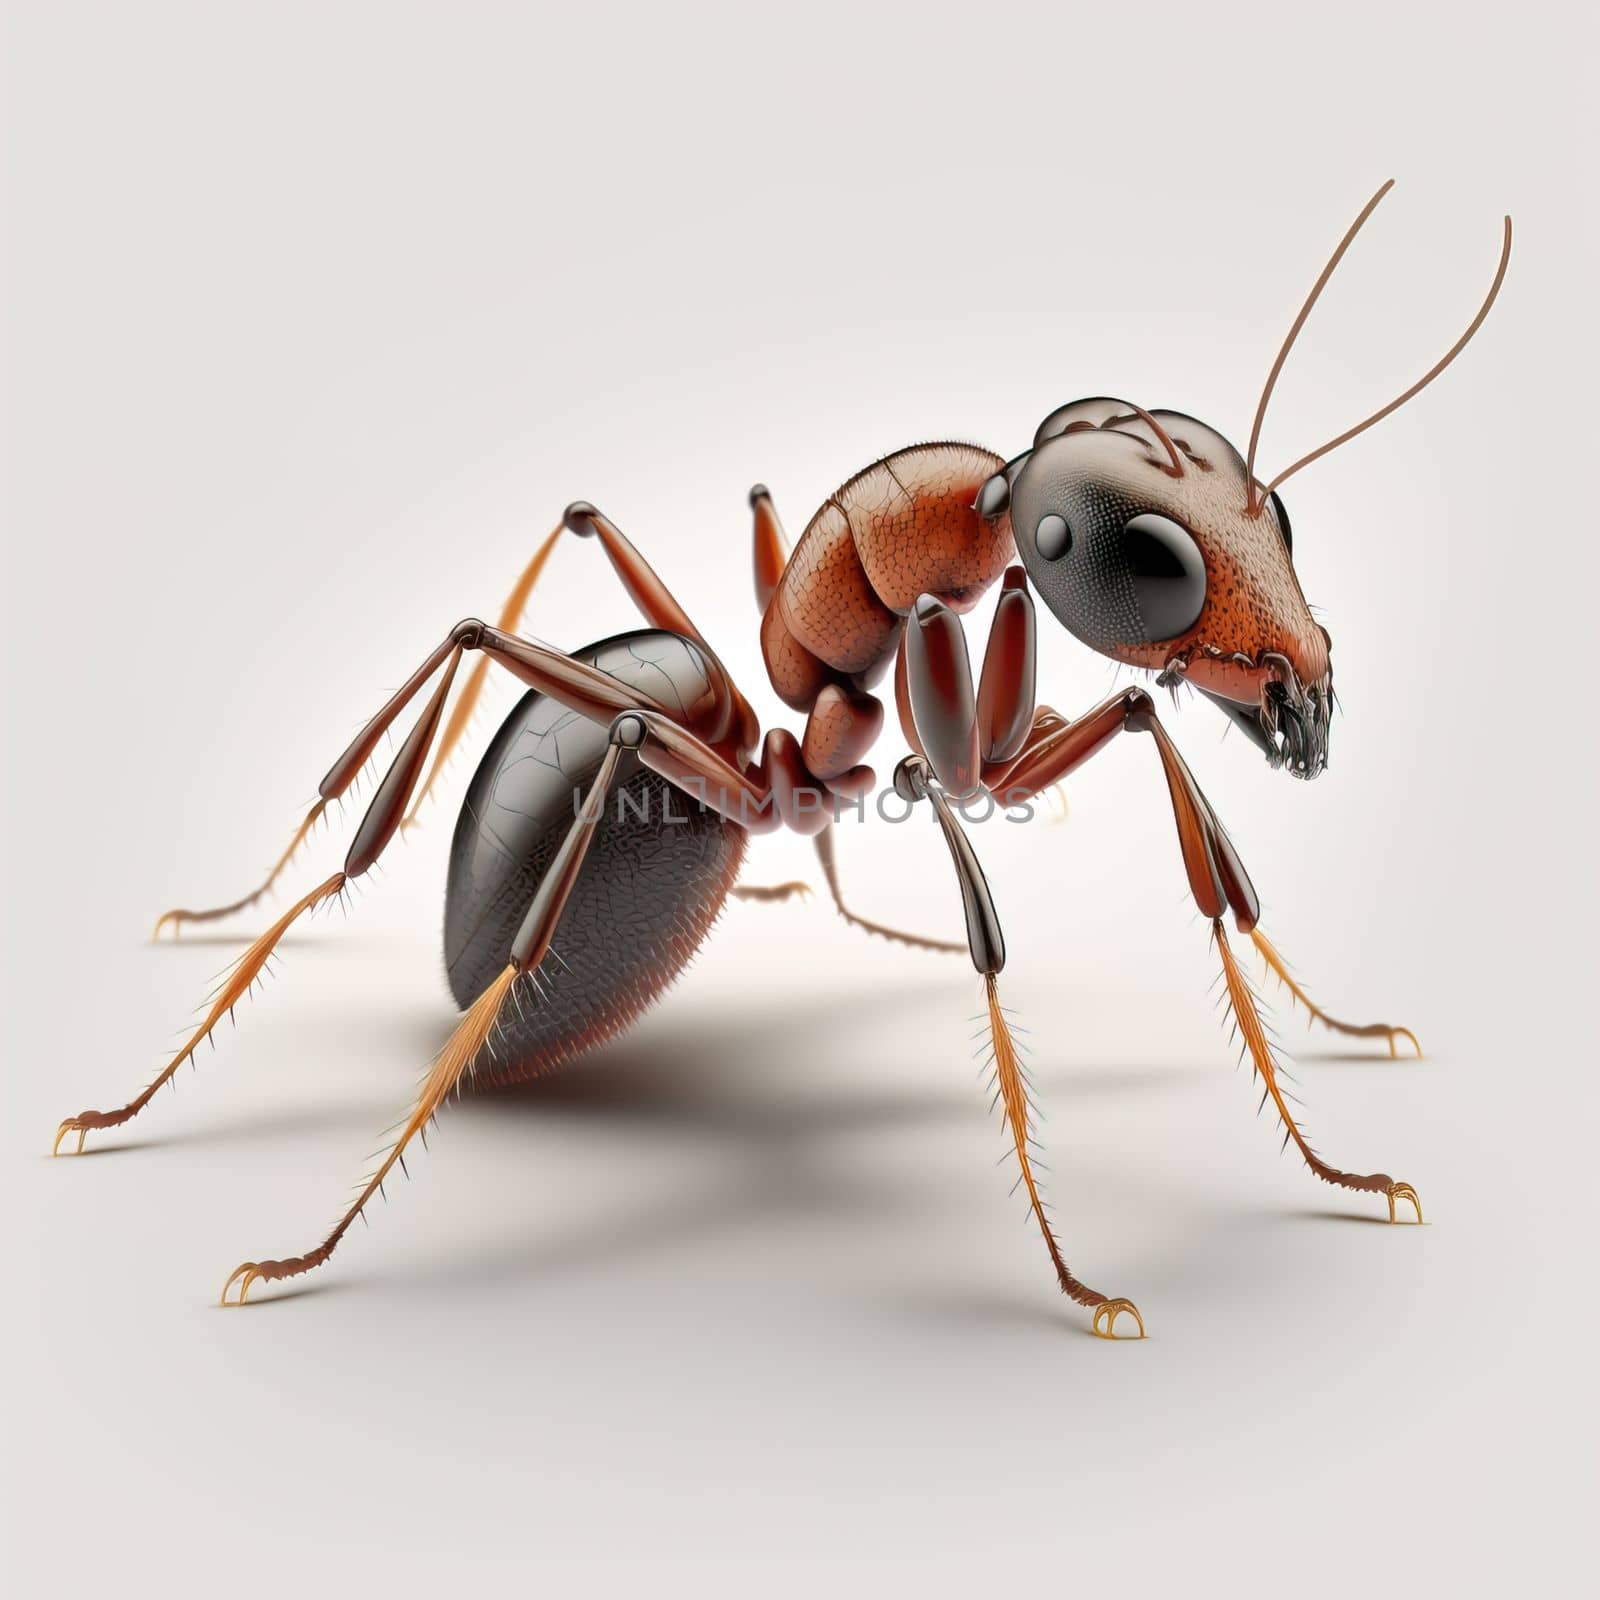 3D Rendered Solenopsis Invicta , Red Fire Ant, isolated white background. Download image